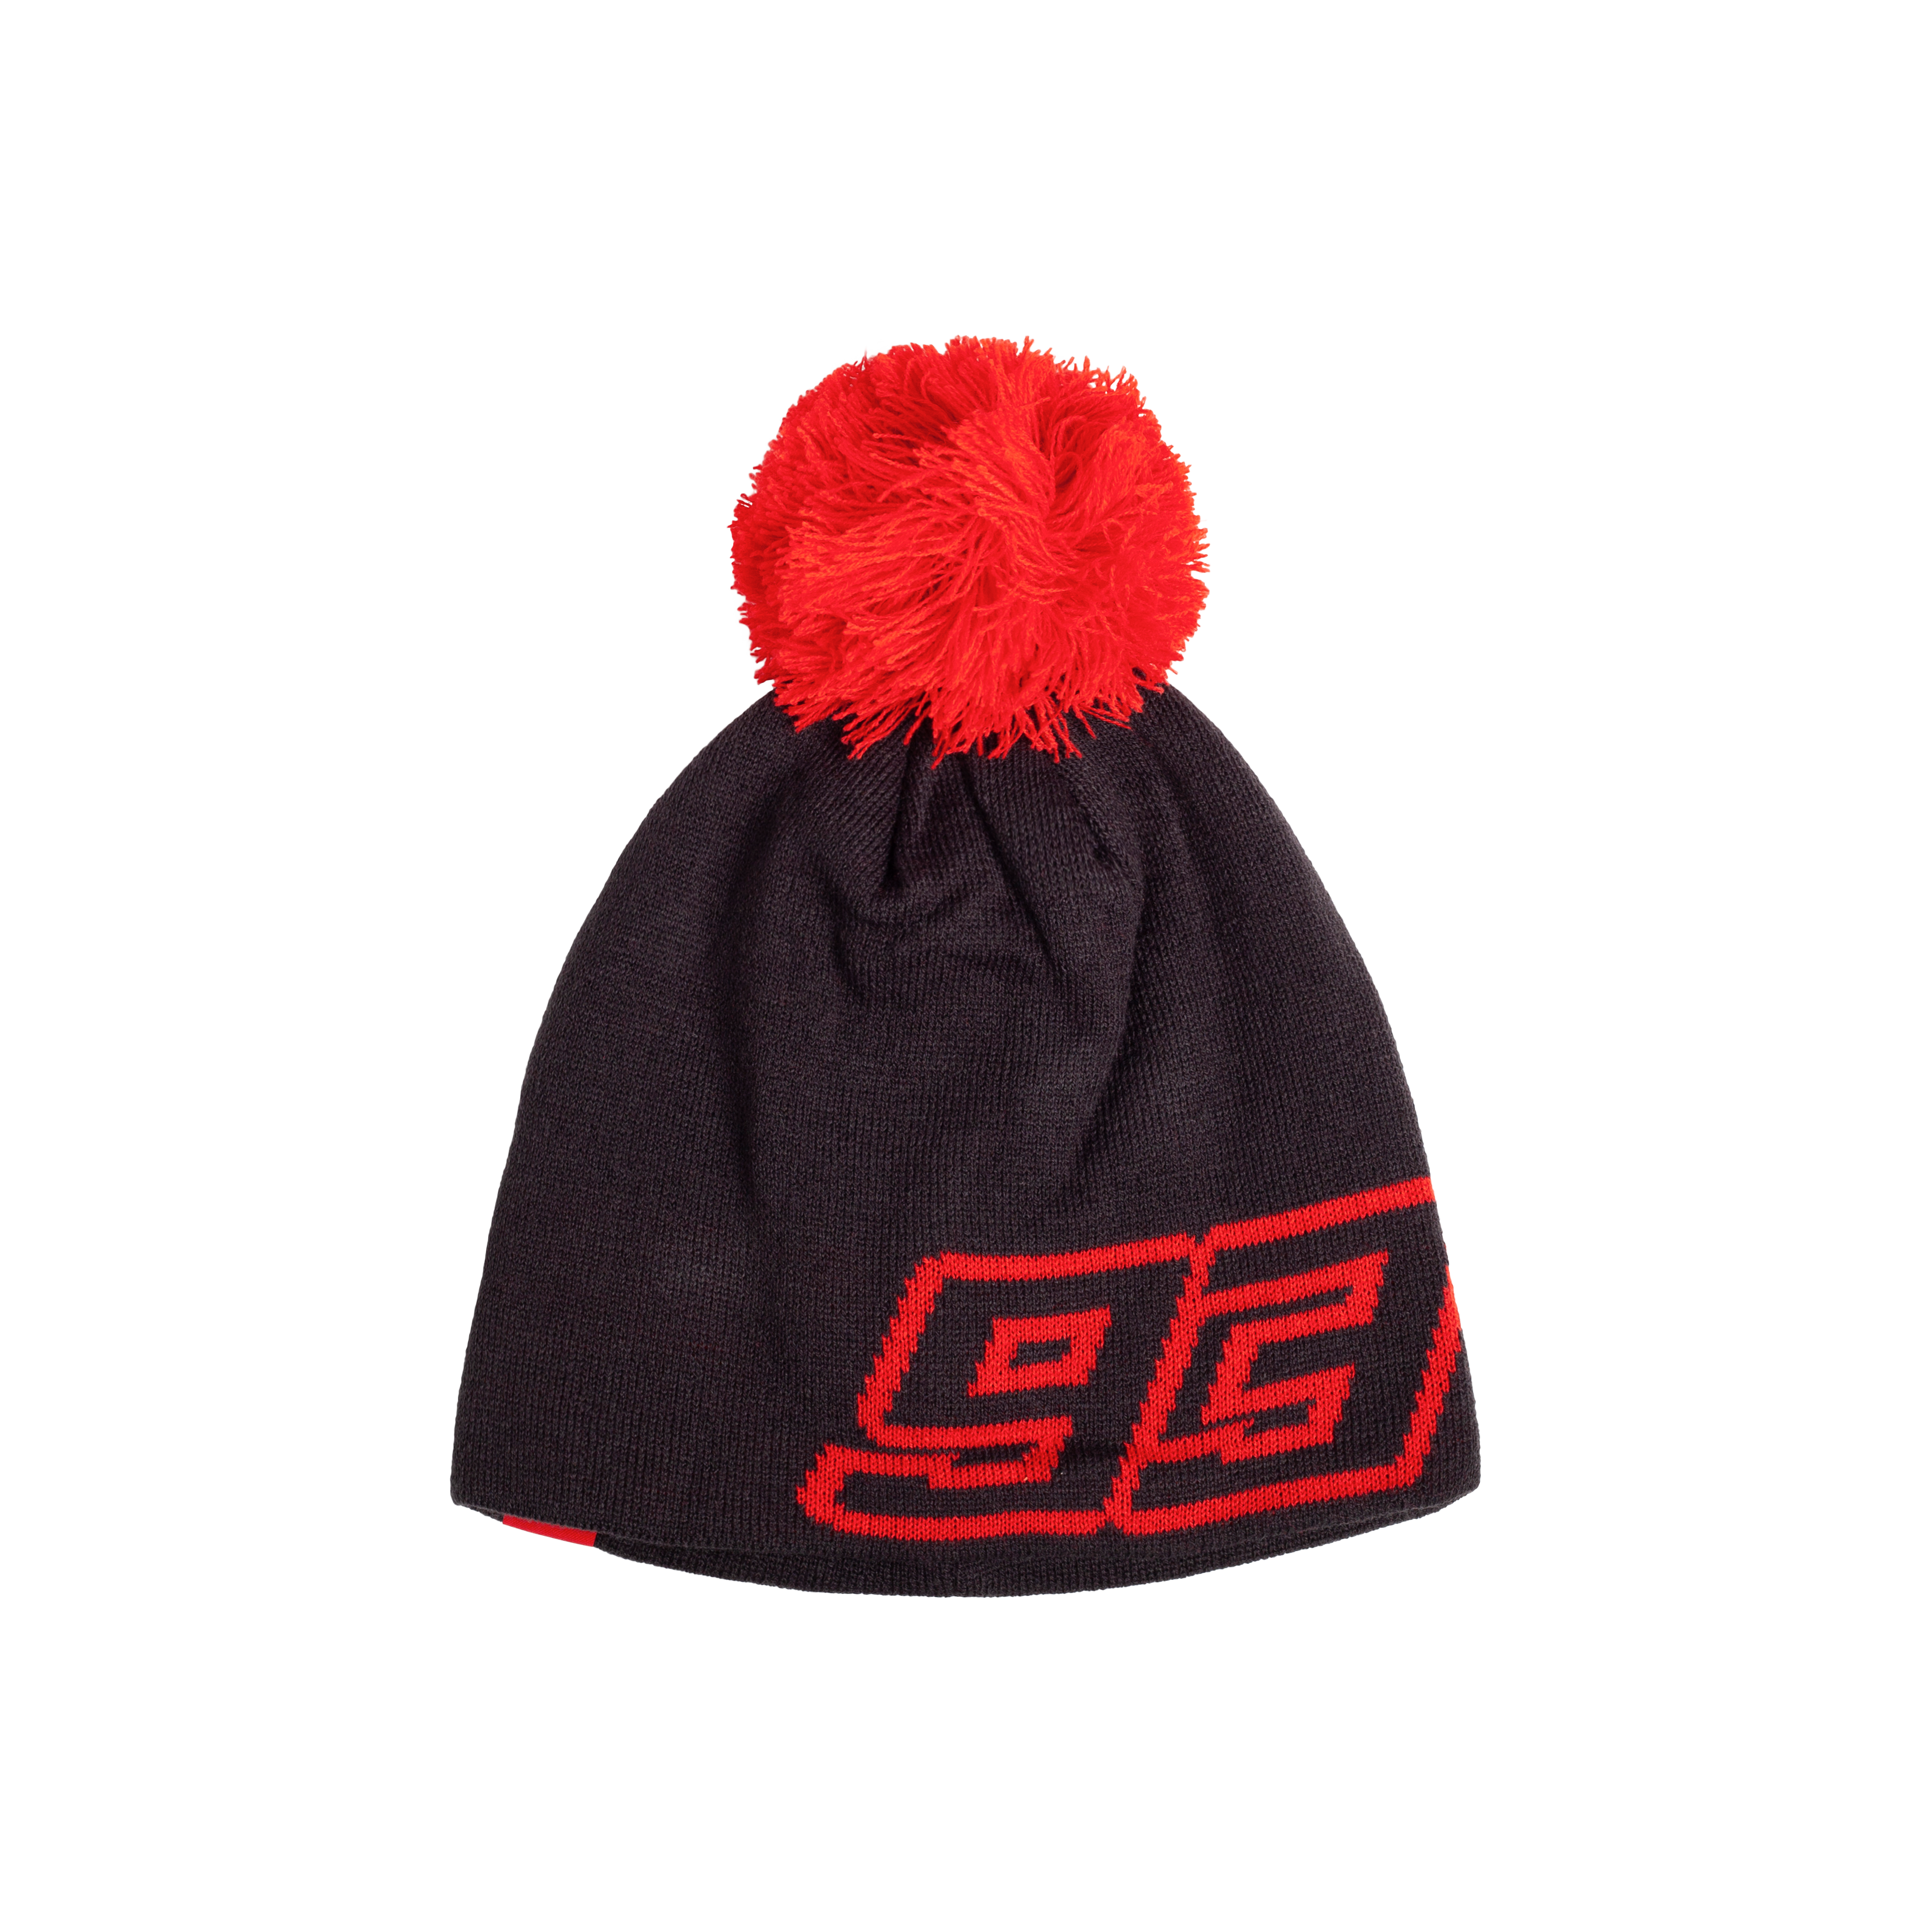 2019 Marc Marquez 93 MotoGP GREY Beanie Hat Warm Winter Knitted Adult One Size 